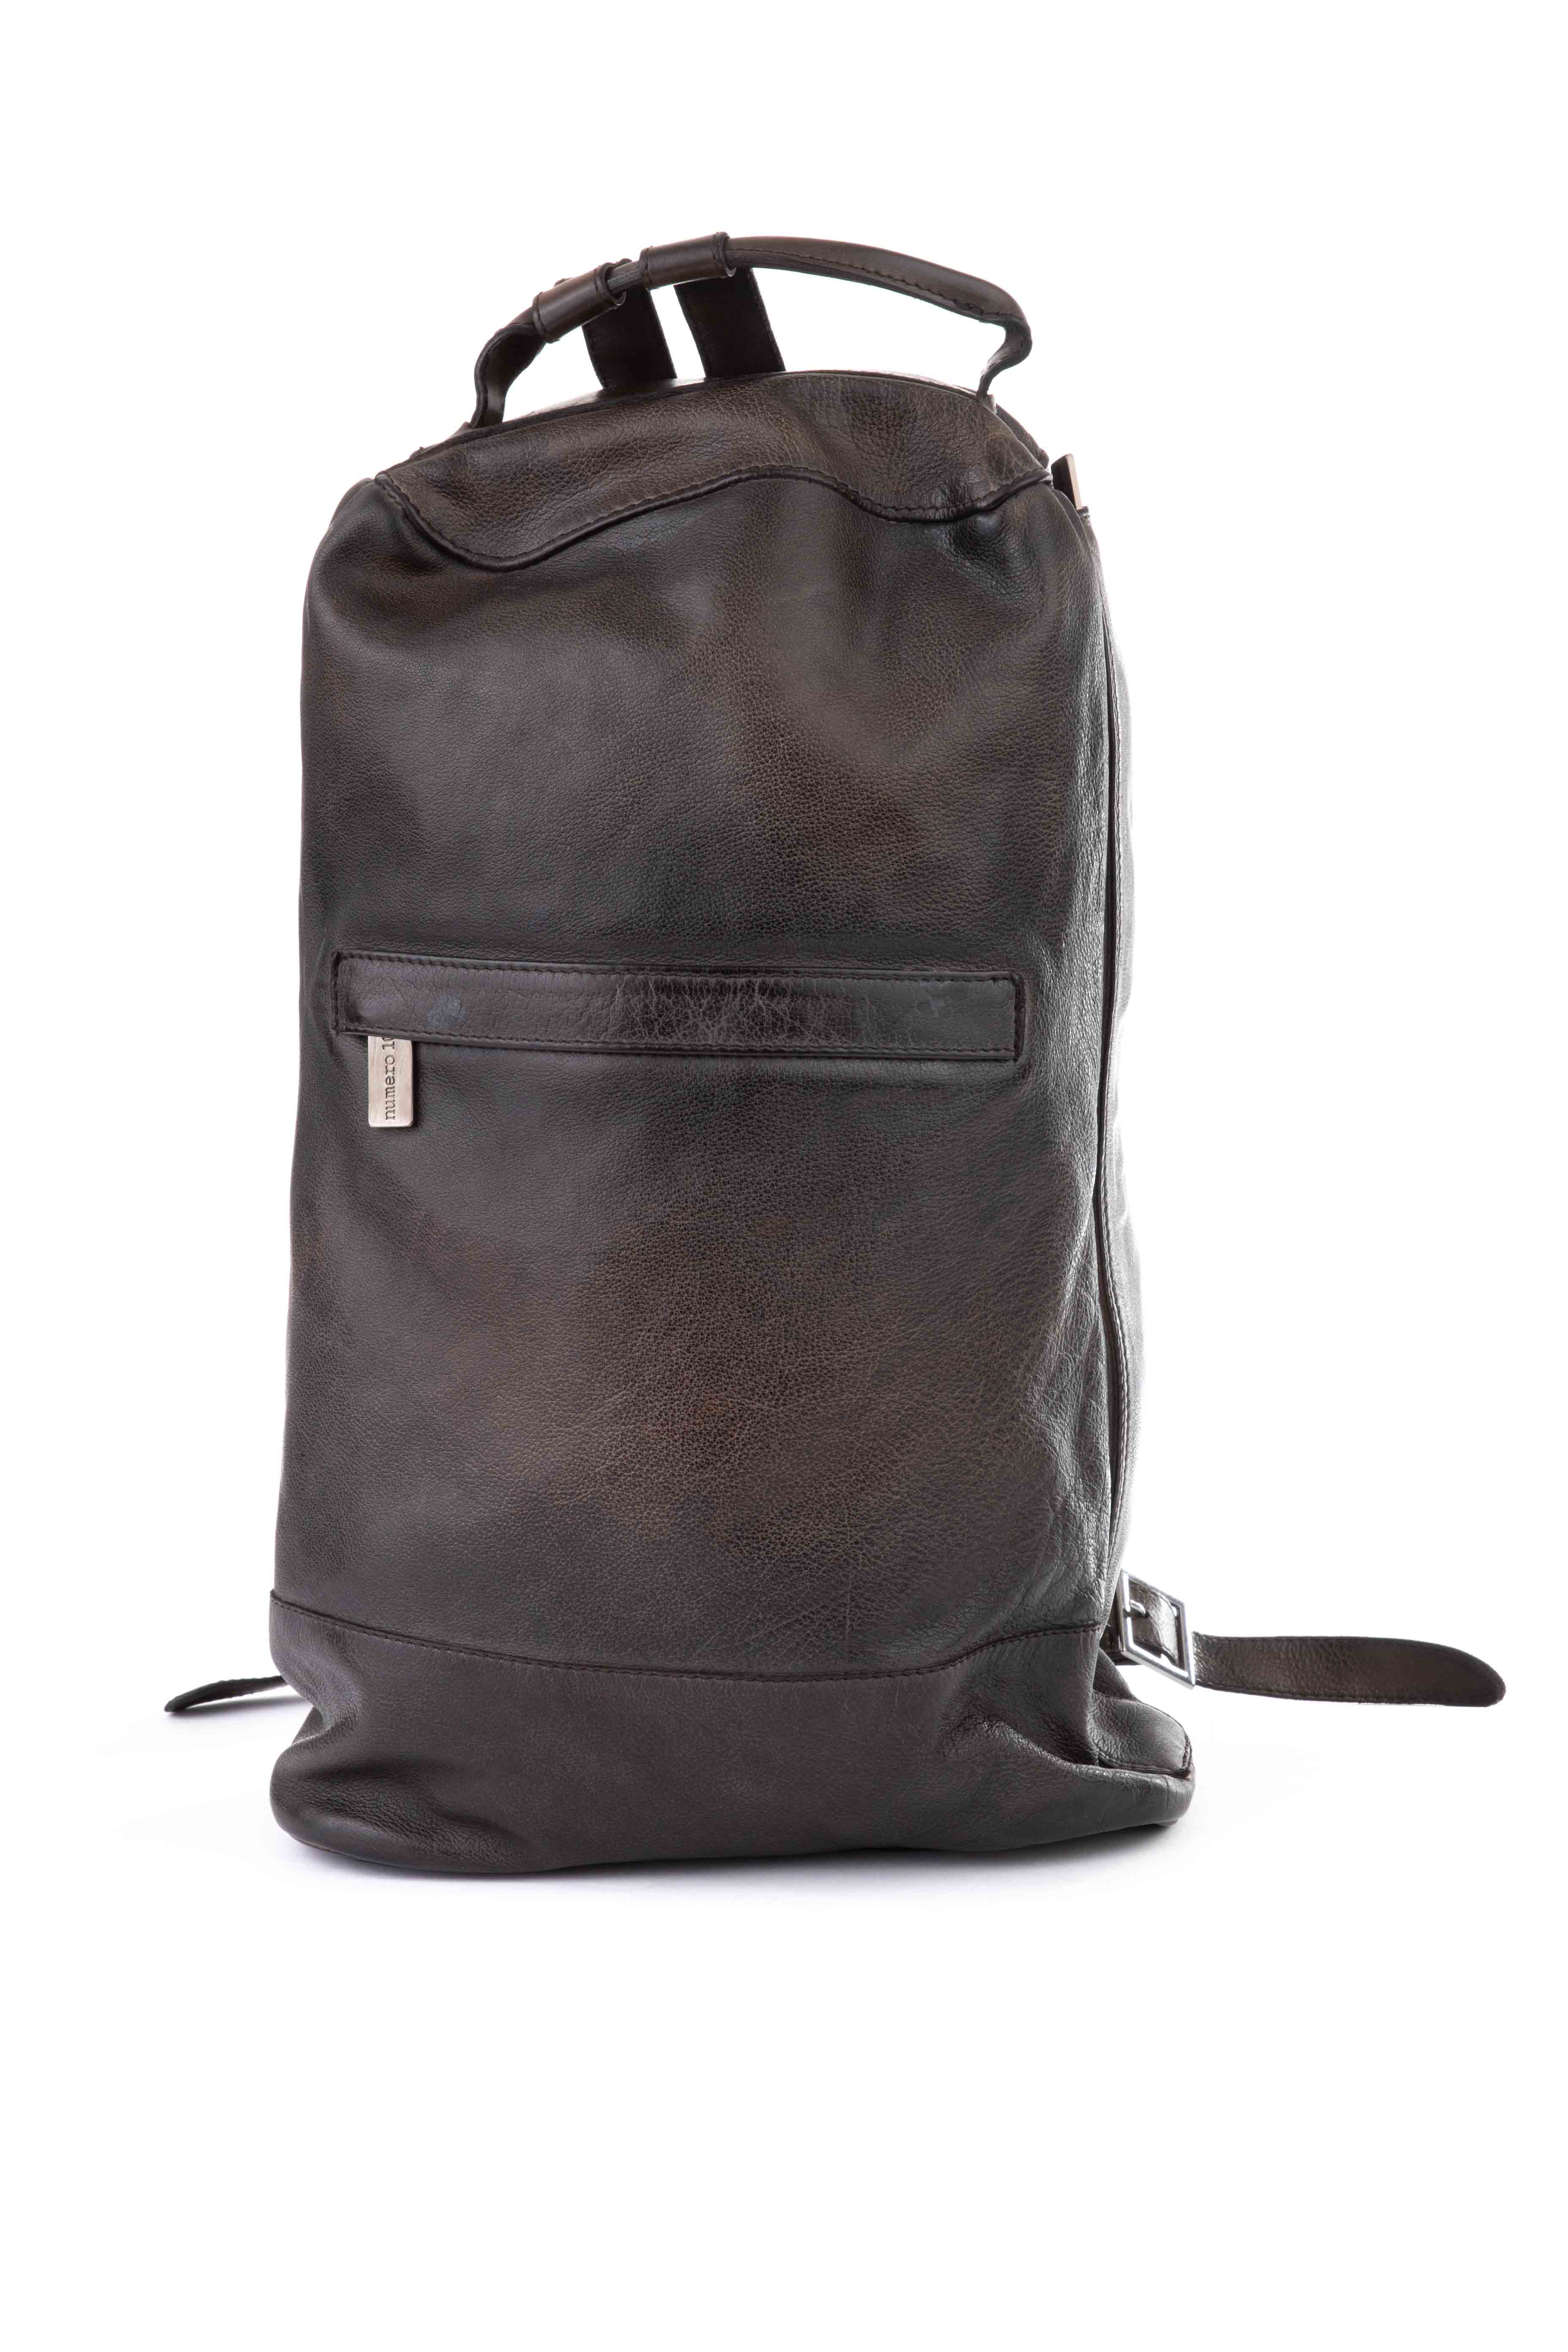 Handcrafted buffalo leather backpack